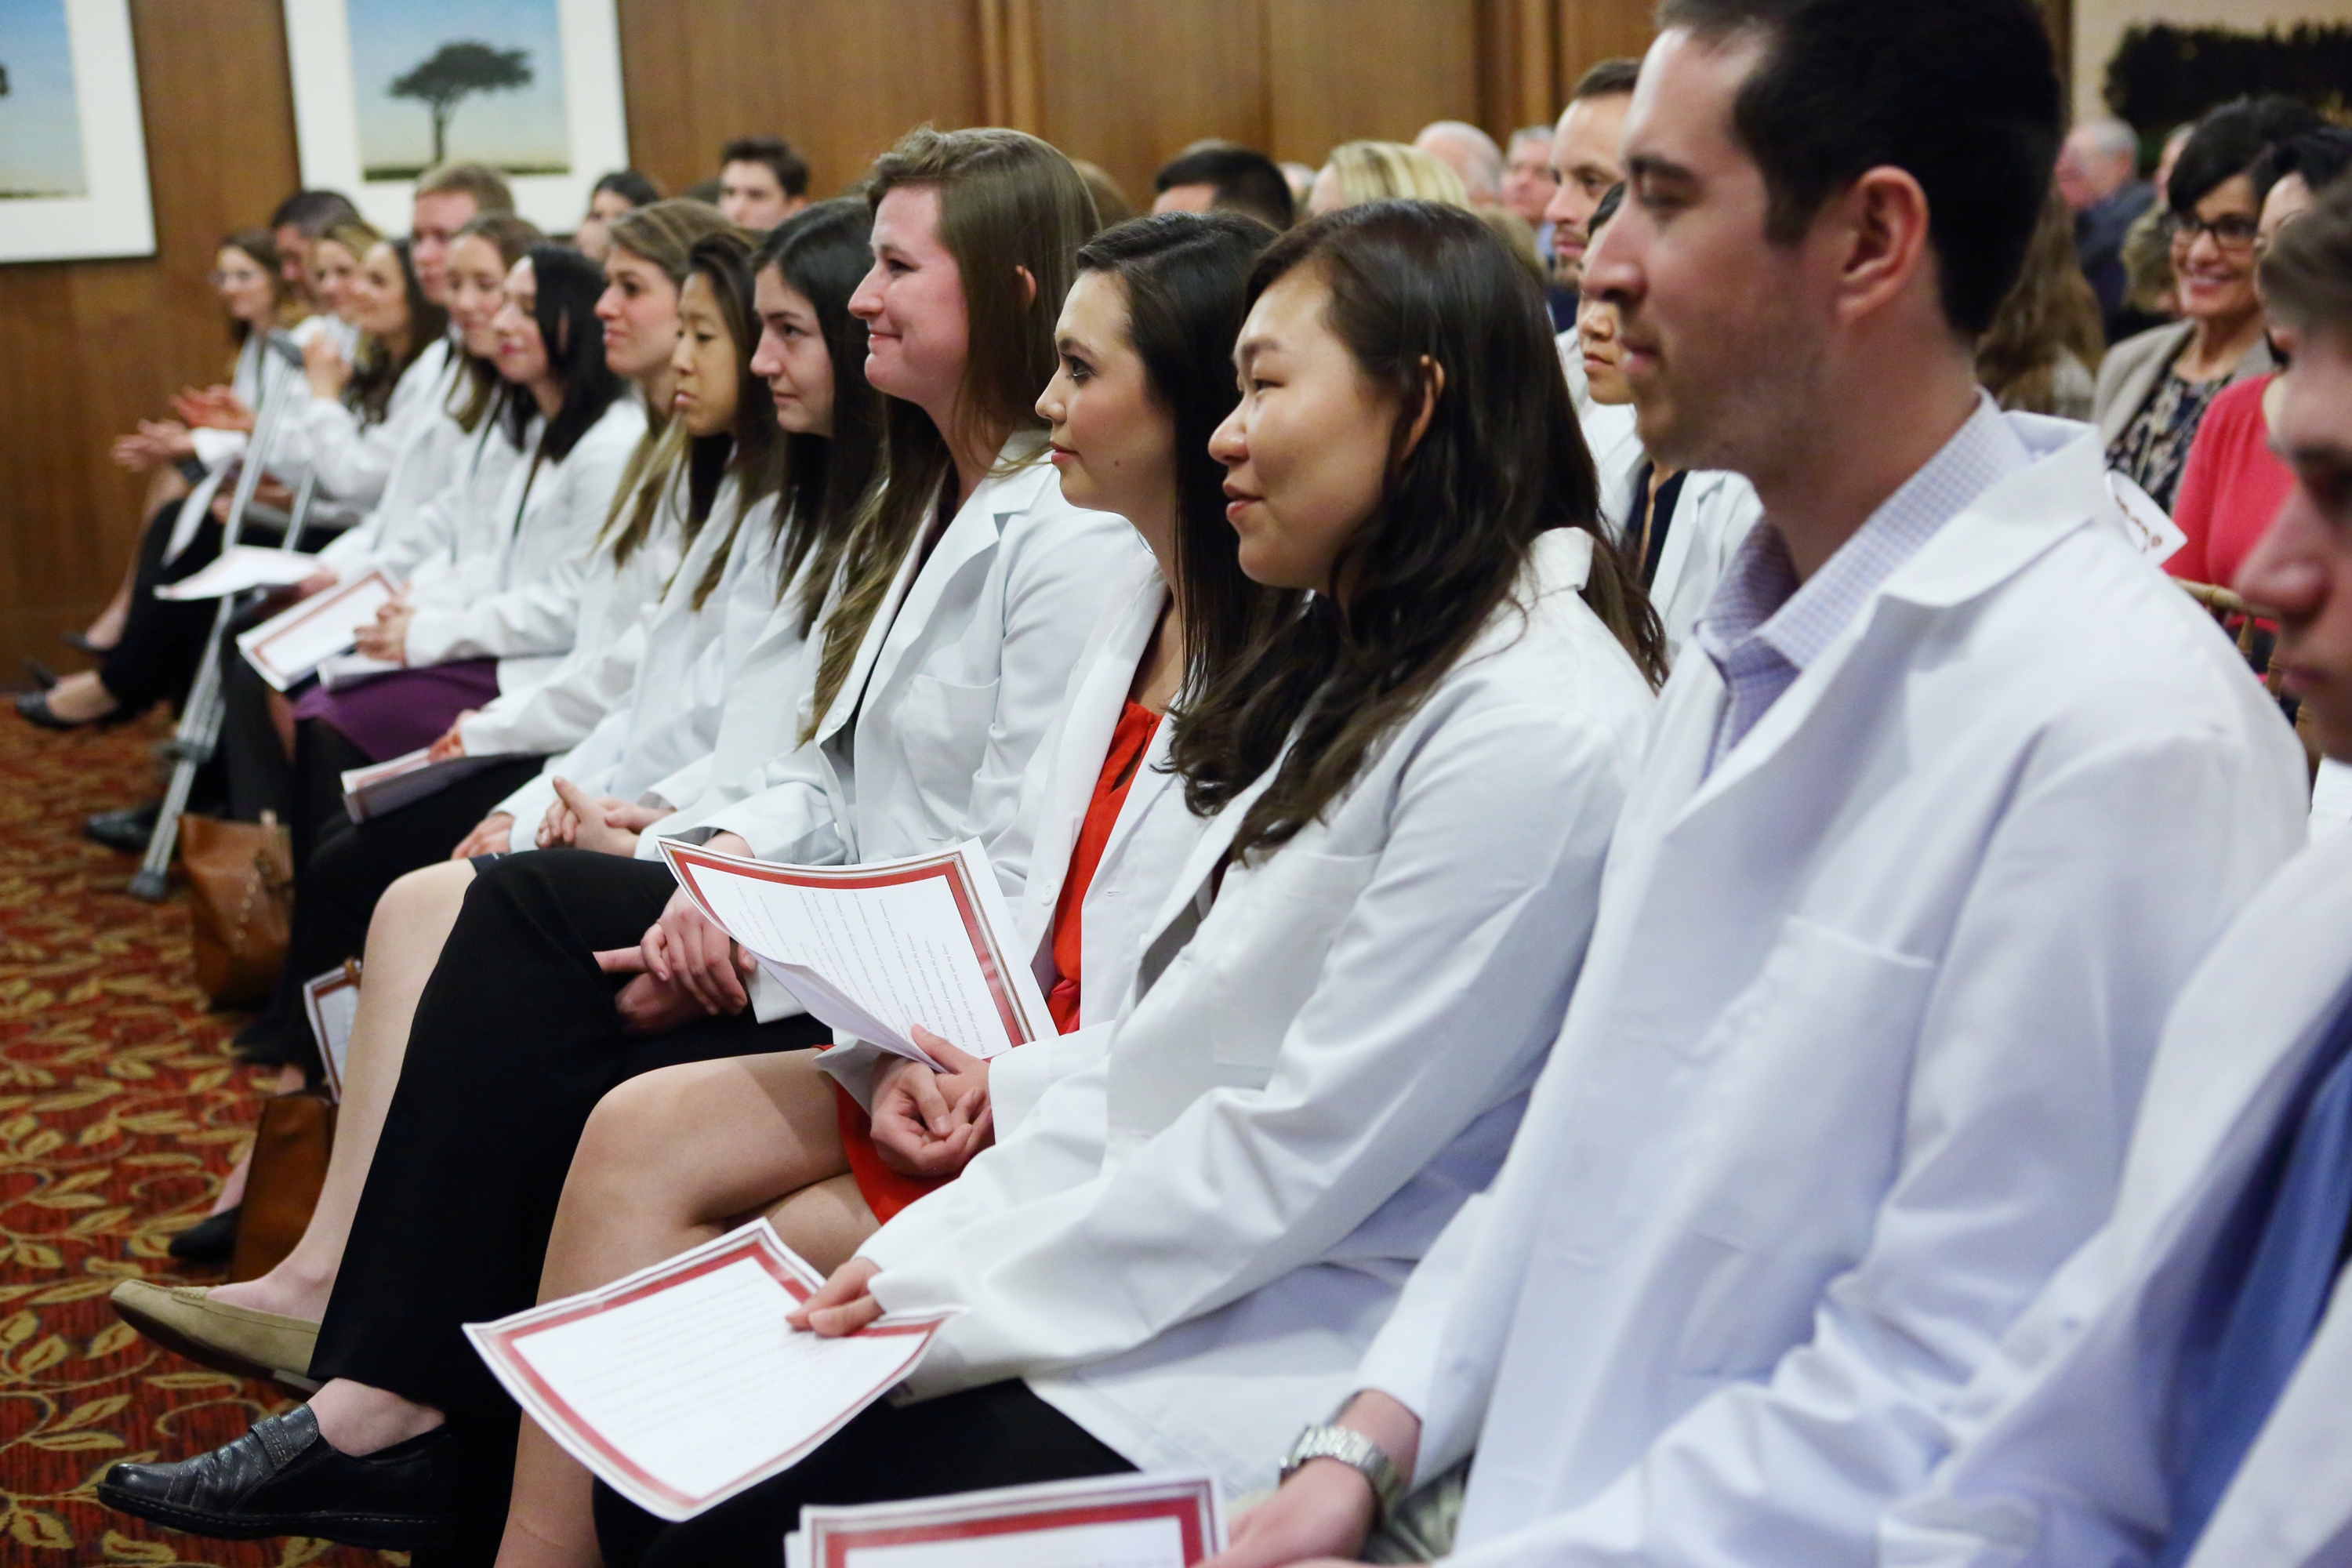 New Class of Physician Assistant Students Earn Their White Coats | Newsroom  | Weill Cornell Medicine